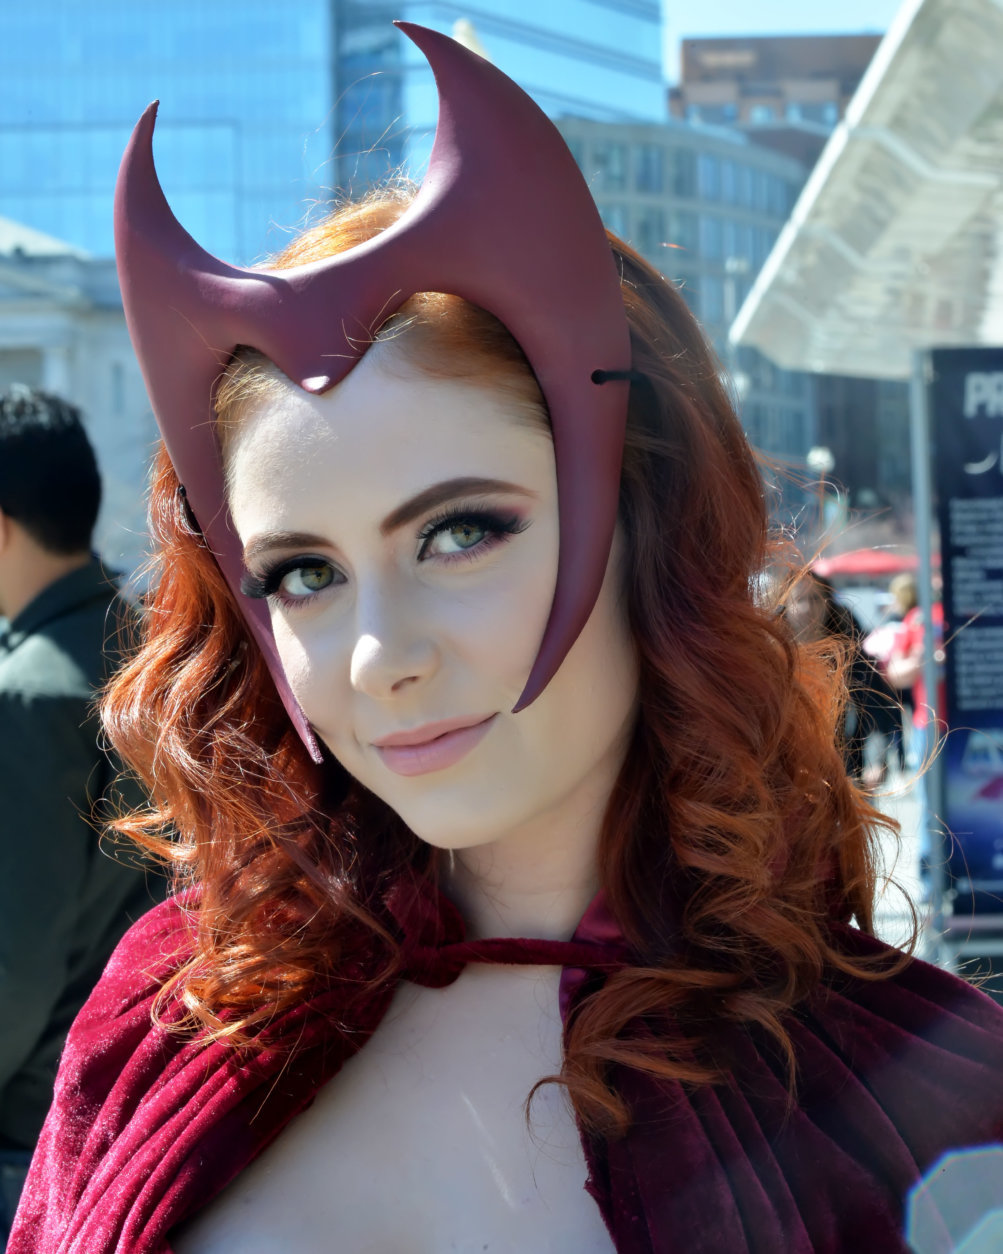 A woman dressed as the Scarlet Witch character from the Marvel Avengers comic book series and film arrives at Awesome Con 2018 at the Walter E. Washington Convention Center in Washington, D.C.